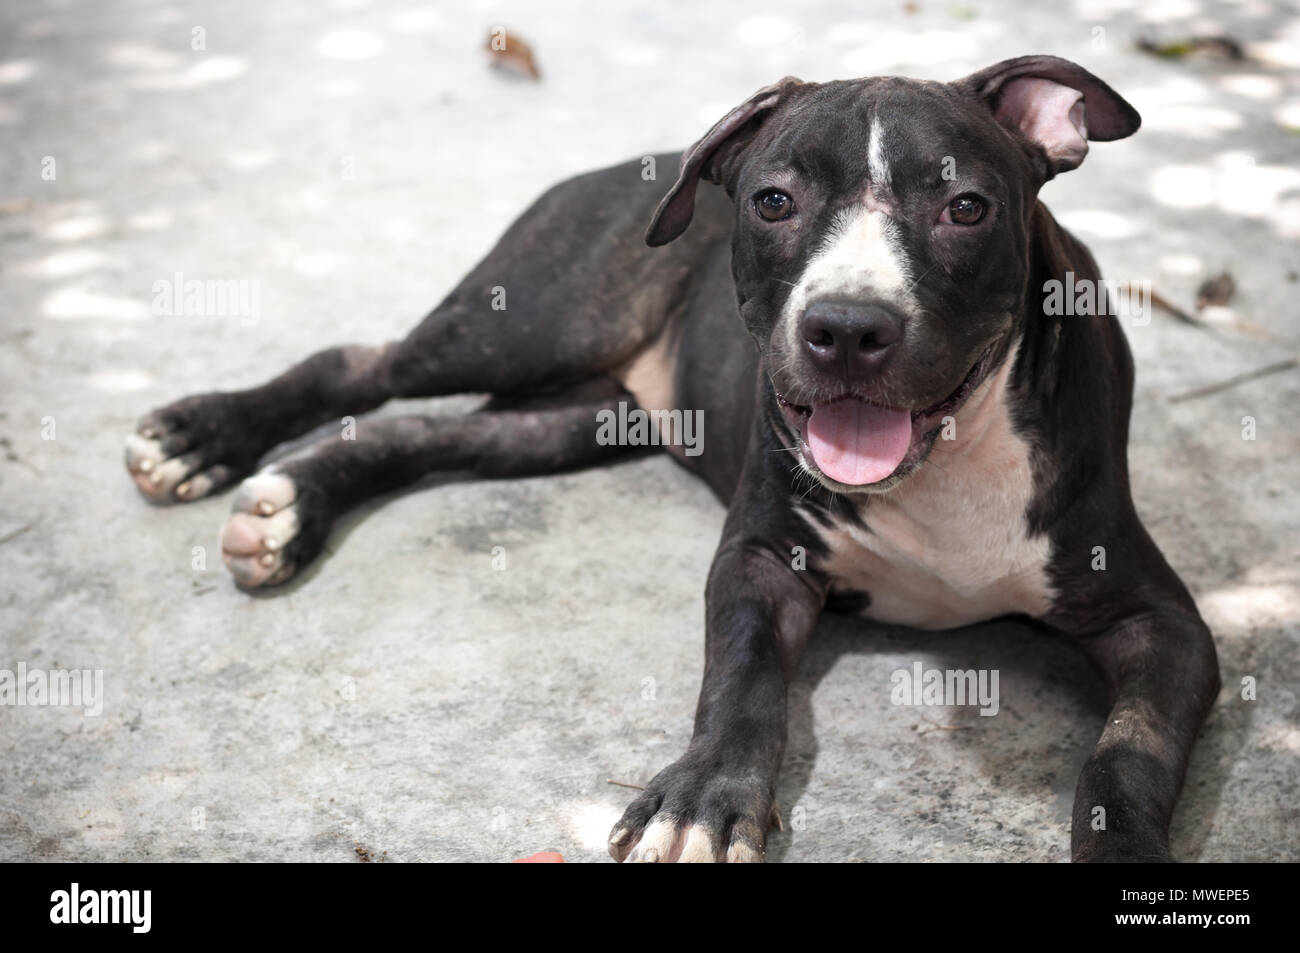 Black Pit bull puppy looking smile funny sitting on concrete background Stock Photo